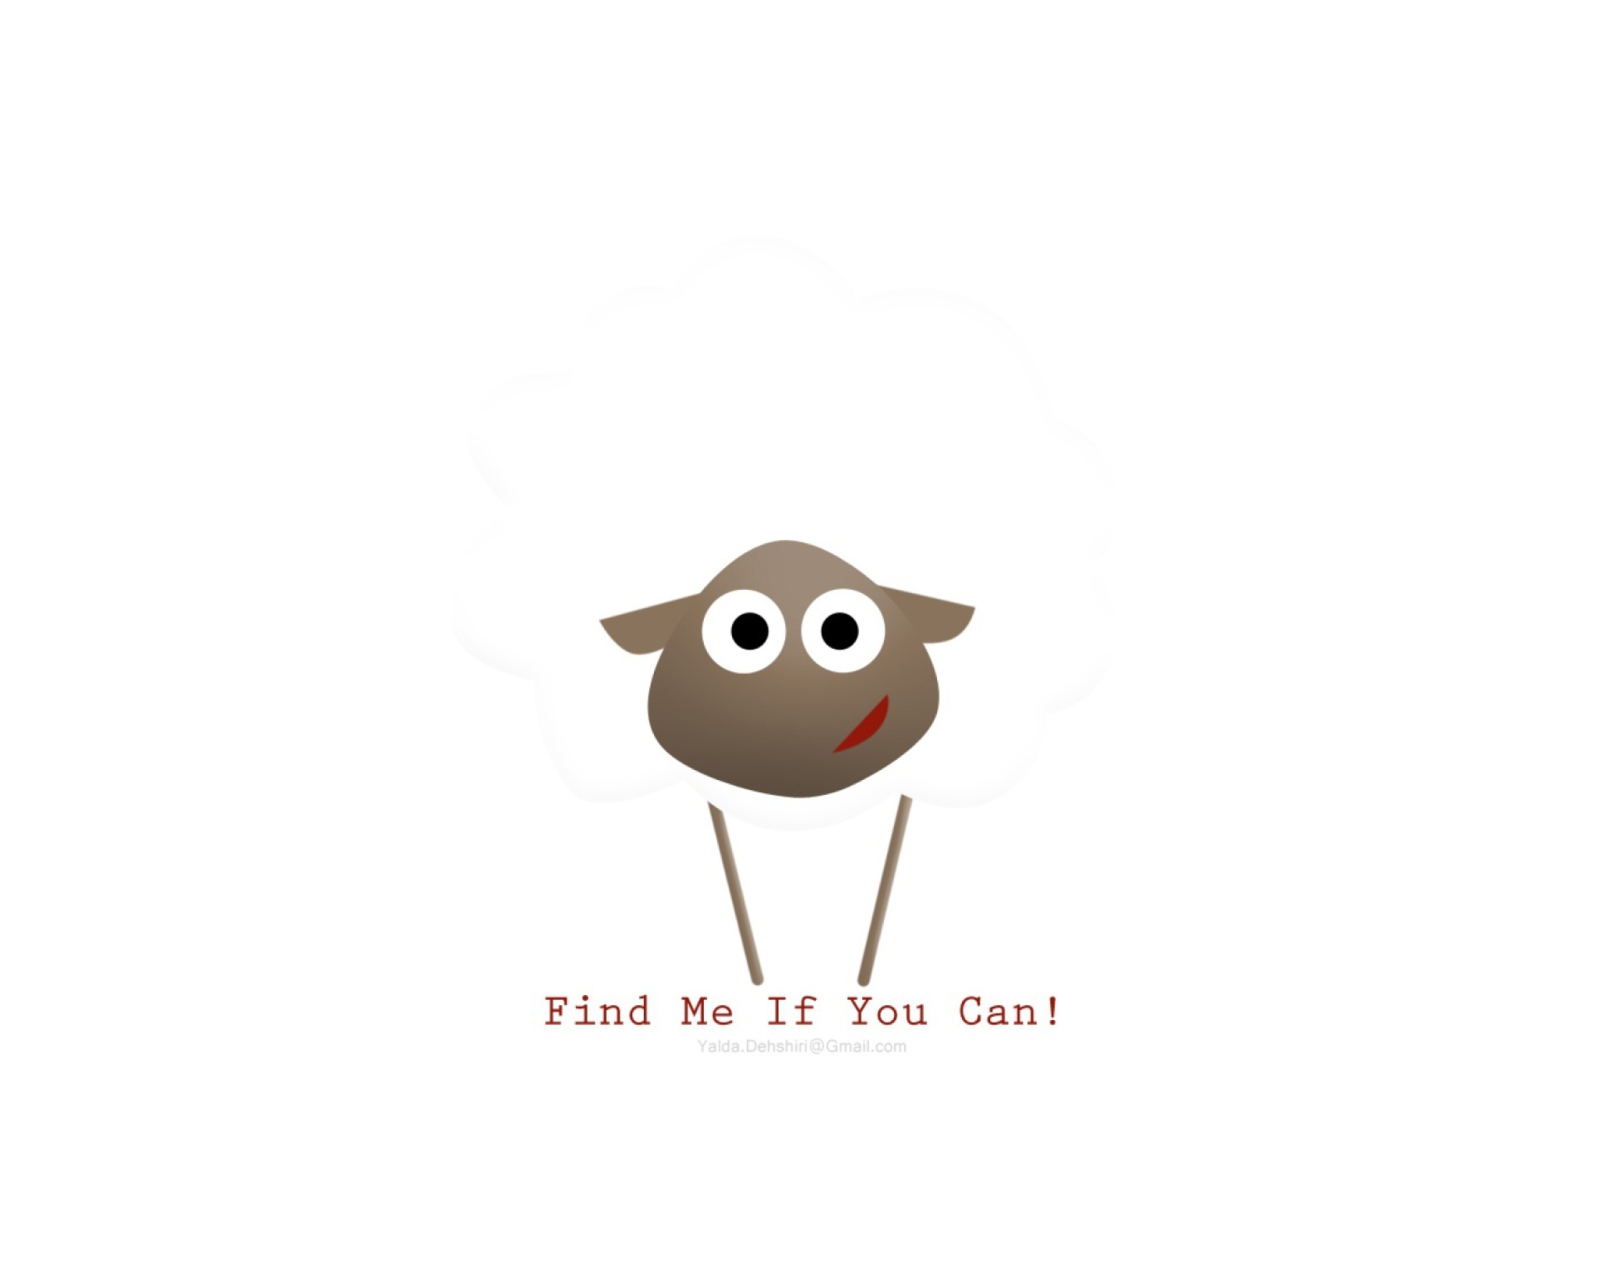 Das Find Me If You Can Wallpaper 1600x1280